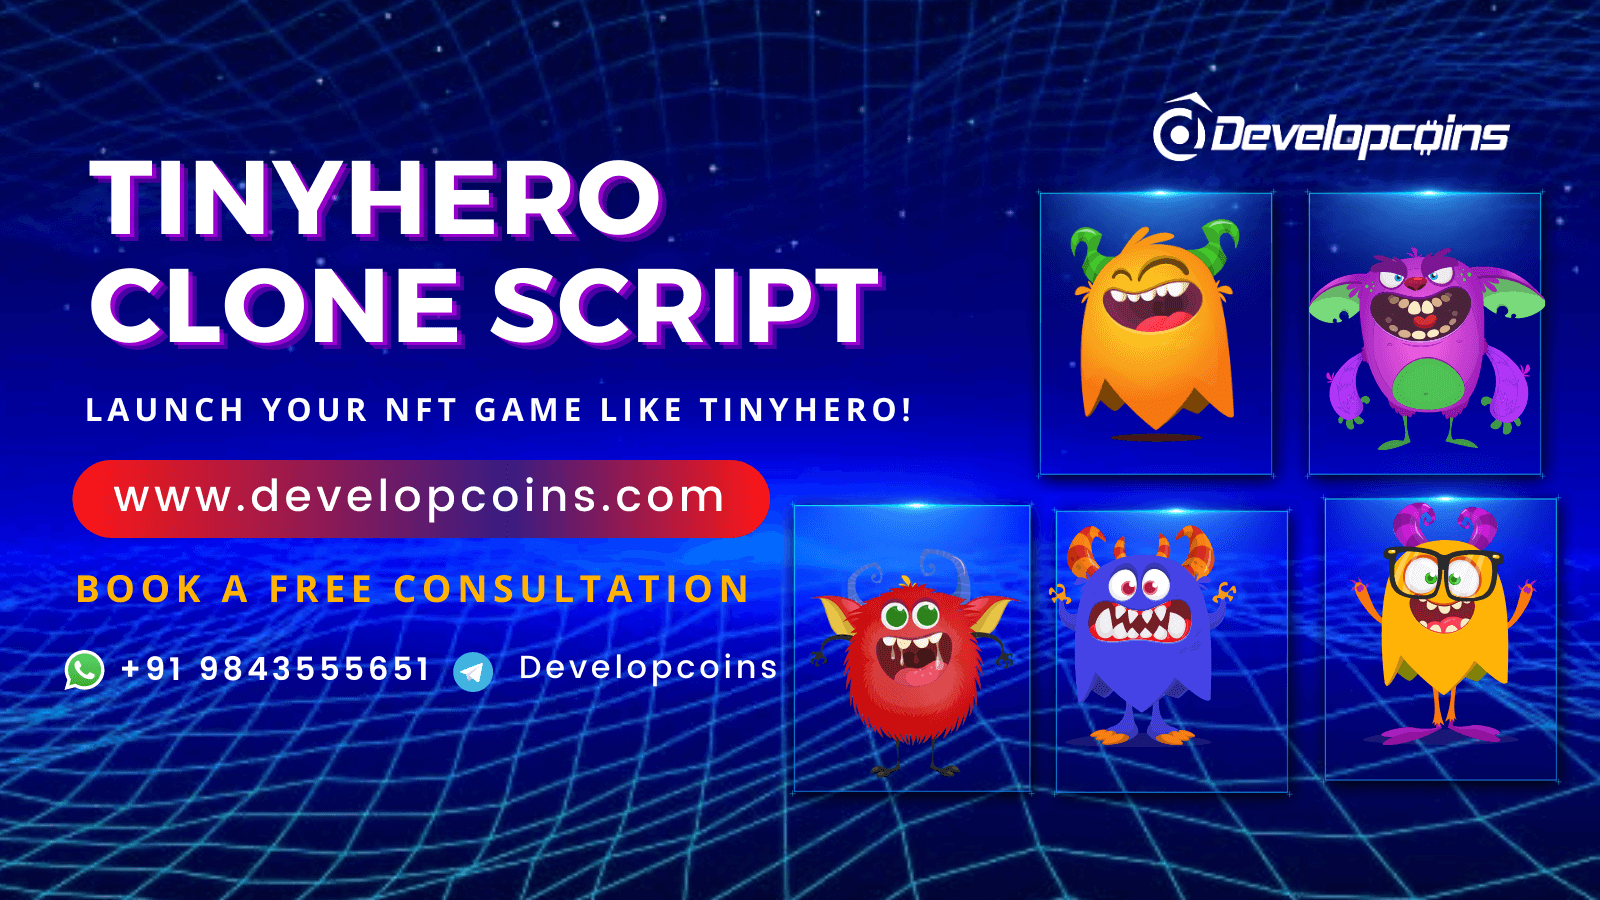 TinyHero Clone Script - To Launch Play-To-Earn NFT Game like TinyHero On Polygon